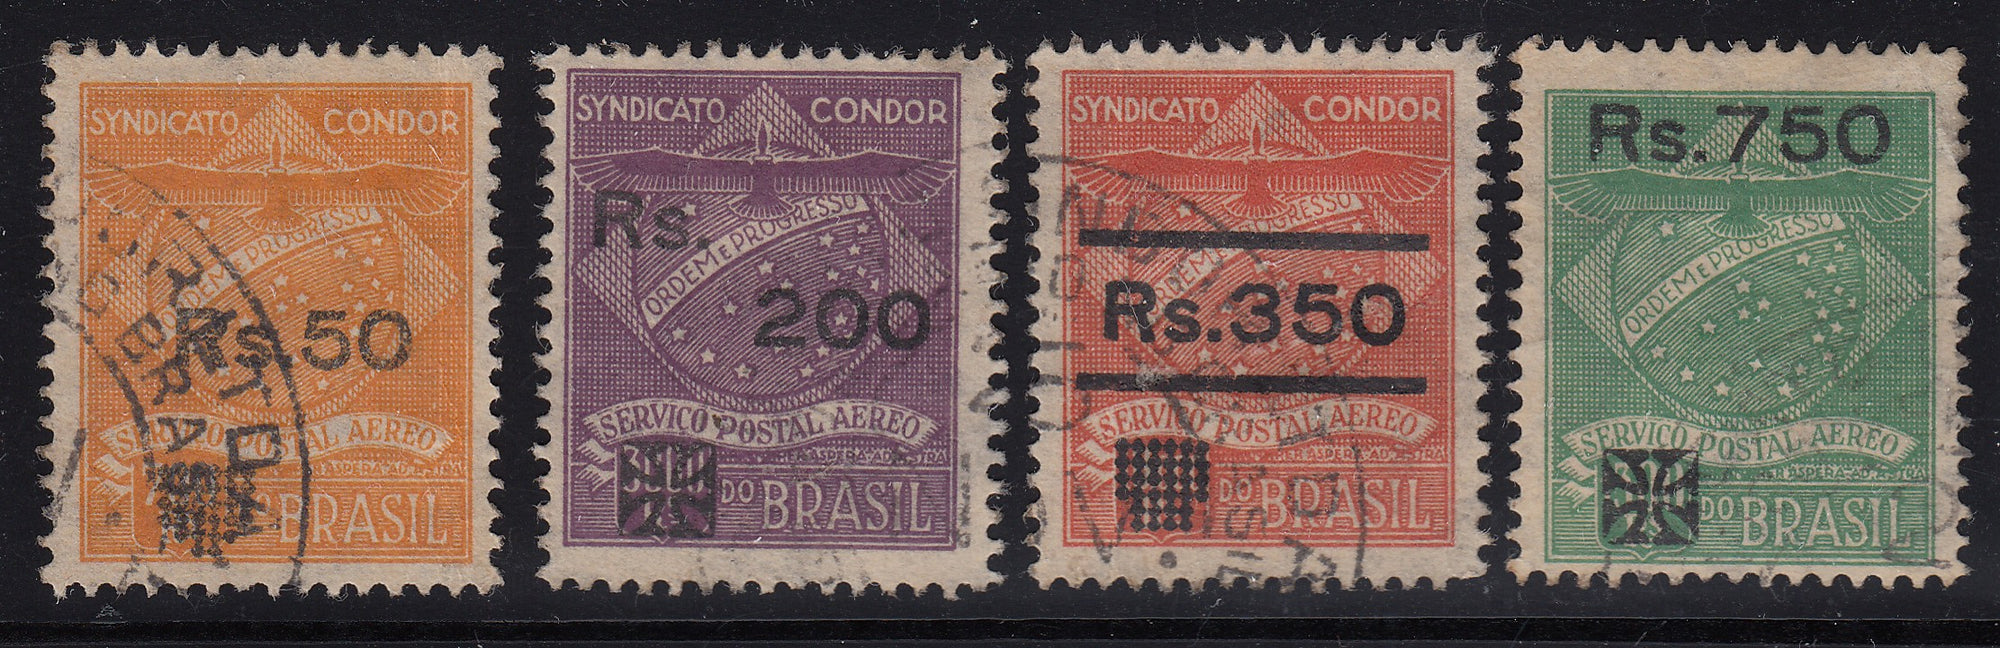 Brazil 1930 Syndicato Condor Complete Airmail Overprint Set Used. Scott 1CL10-1CL13